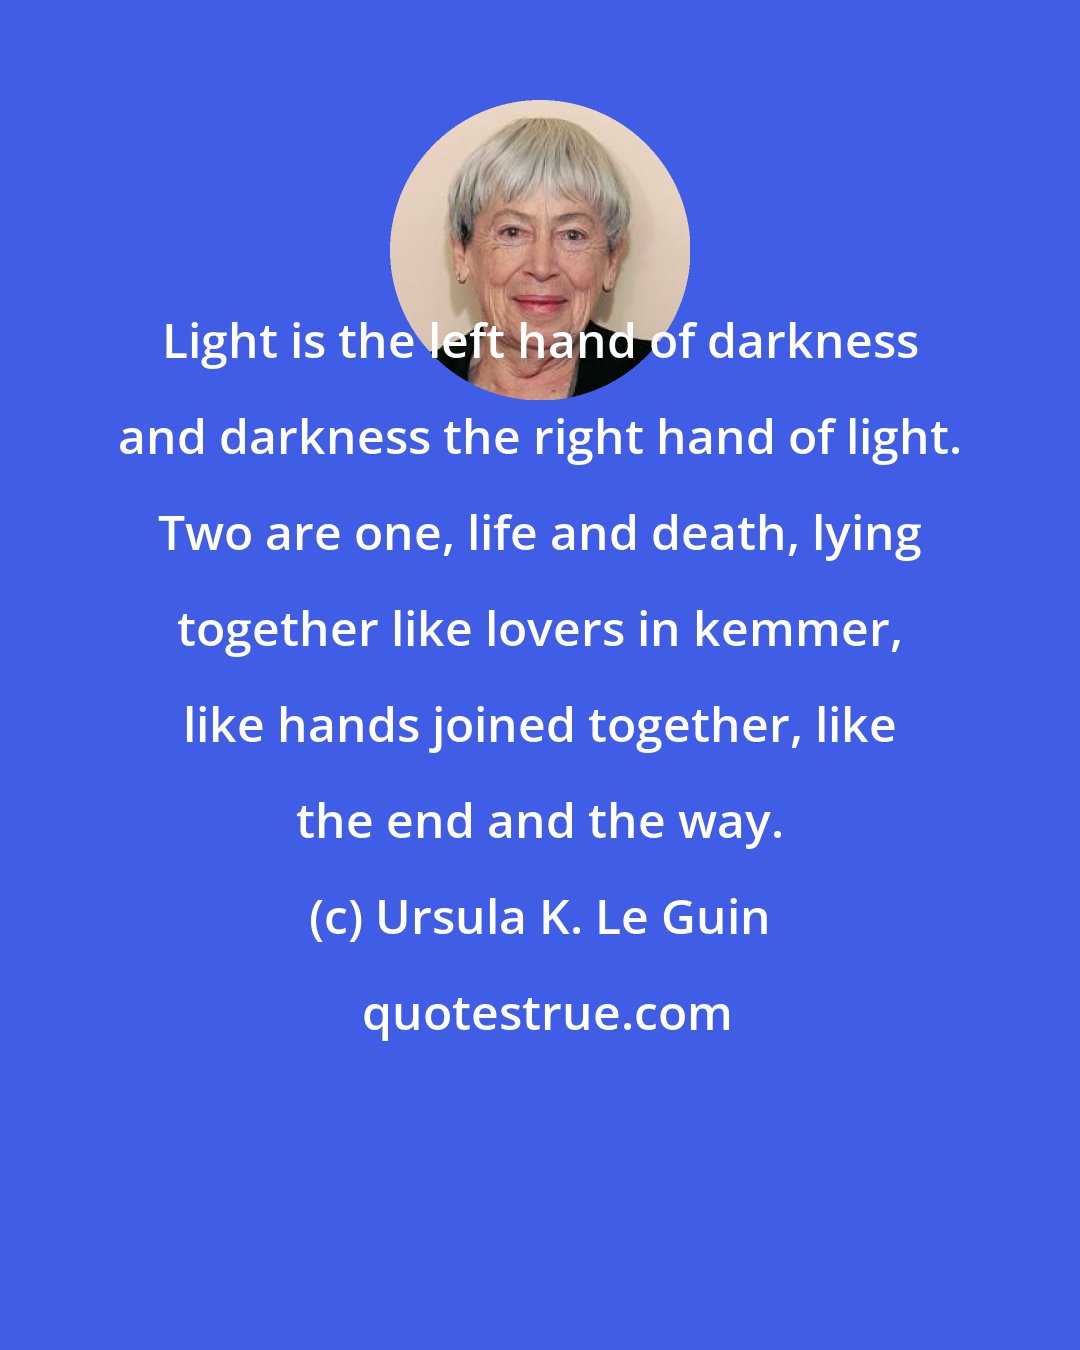 Ursula K. Le Guin: Light is the left hand of darkness and darkness the right hand of light. Two are one, life and death, lying together like lovers in kemmer, like hands joined together, like the end and the way.